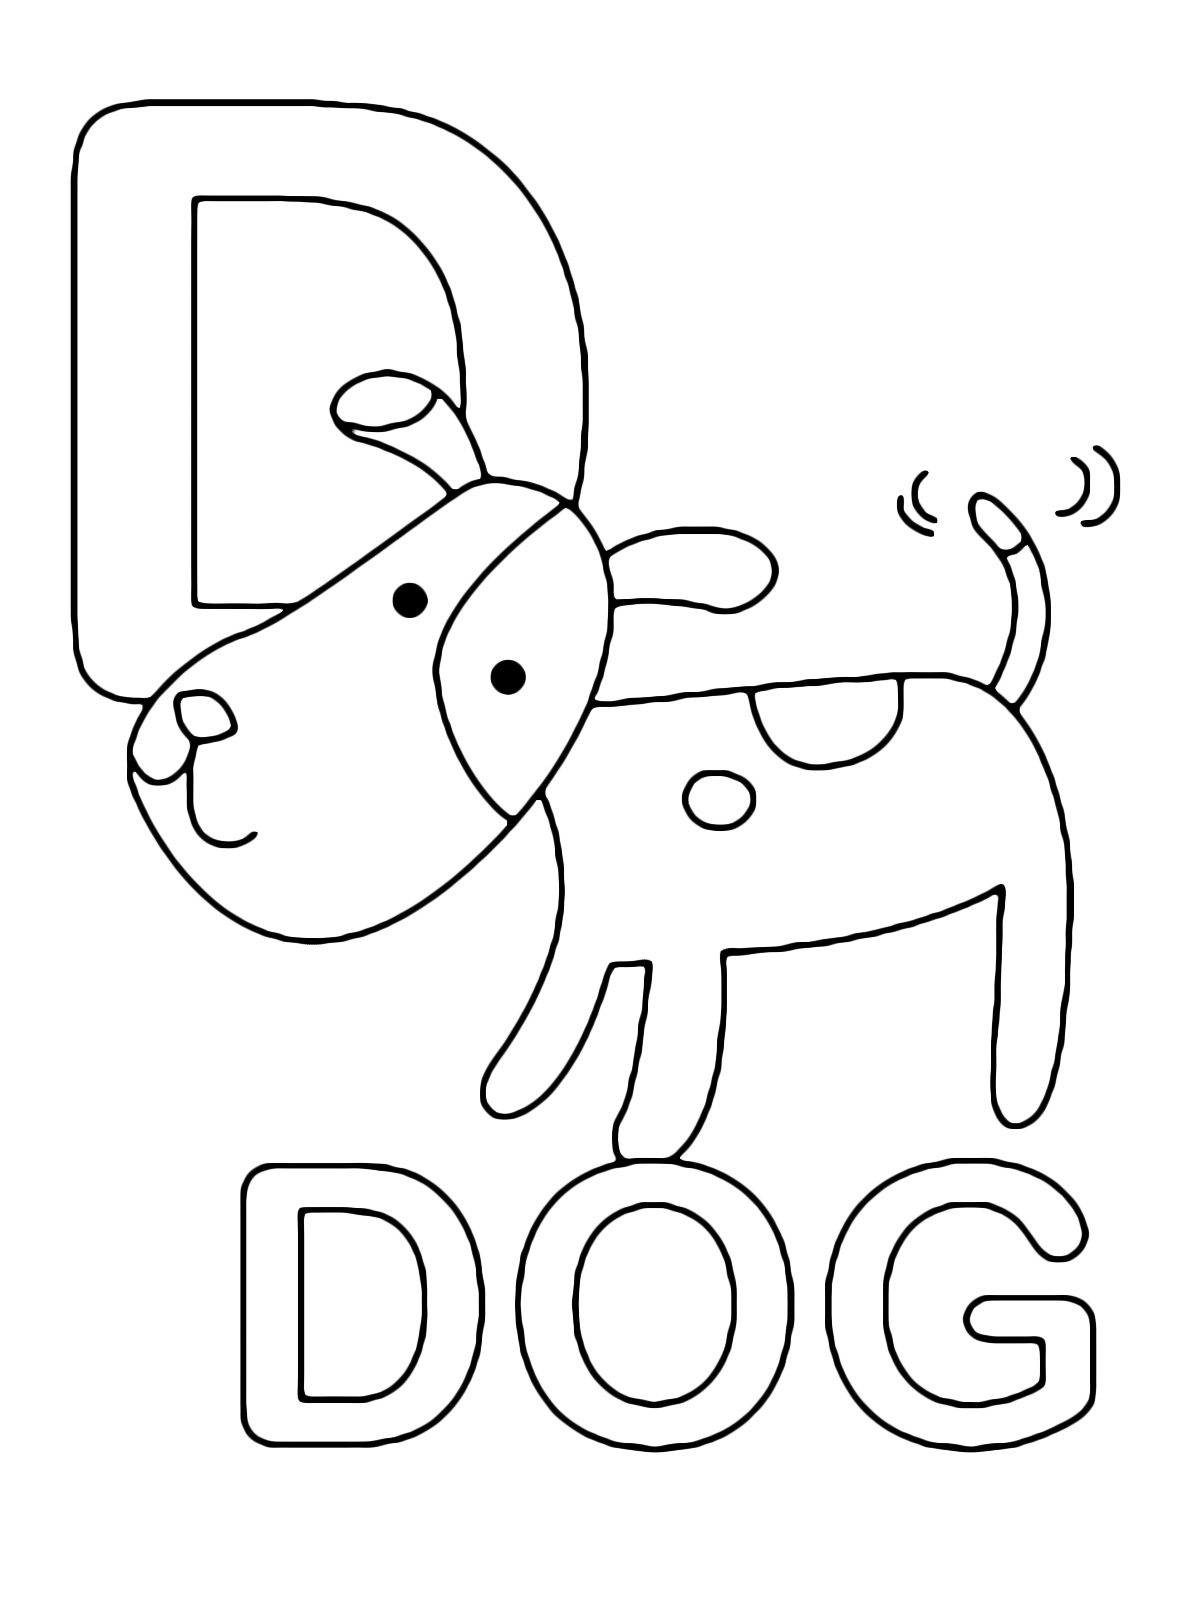 Letters and numbers - D for dog uppercase letter